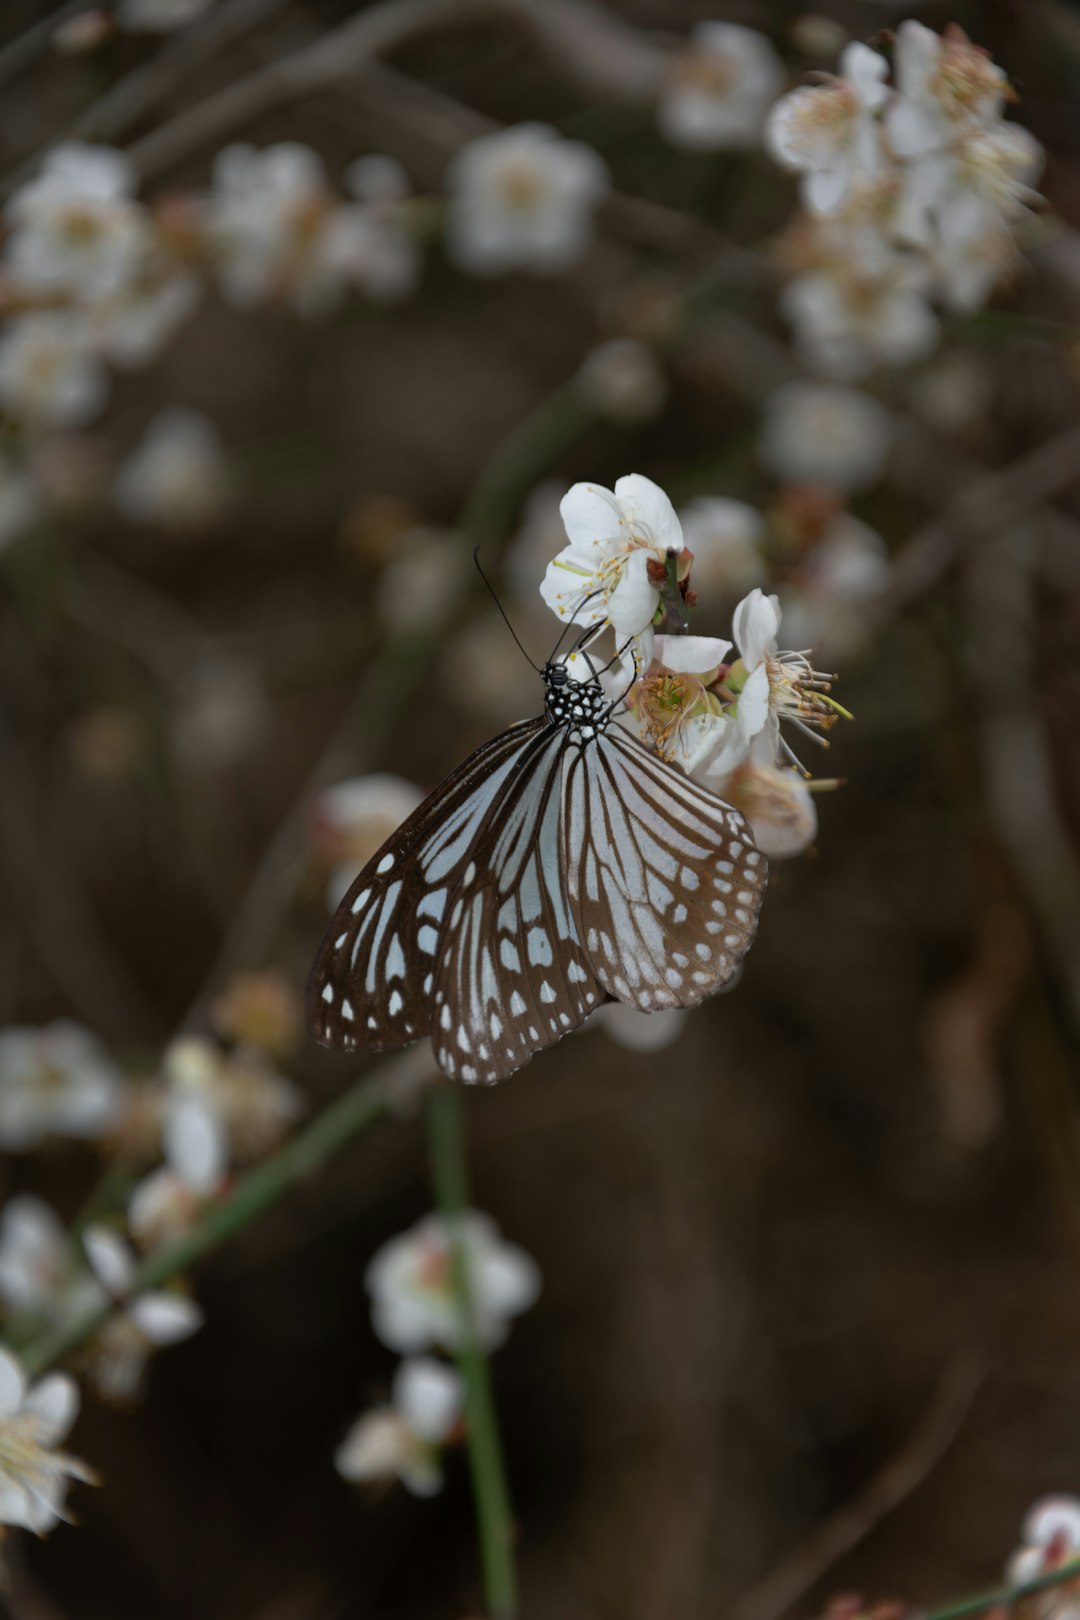 white and black butterfly perched on white flower in close up photography during daytime